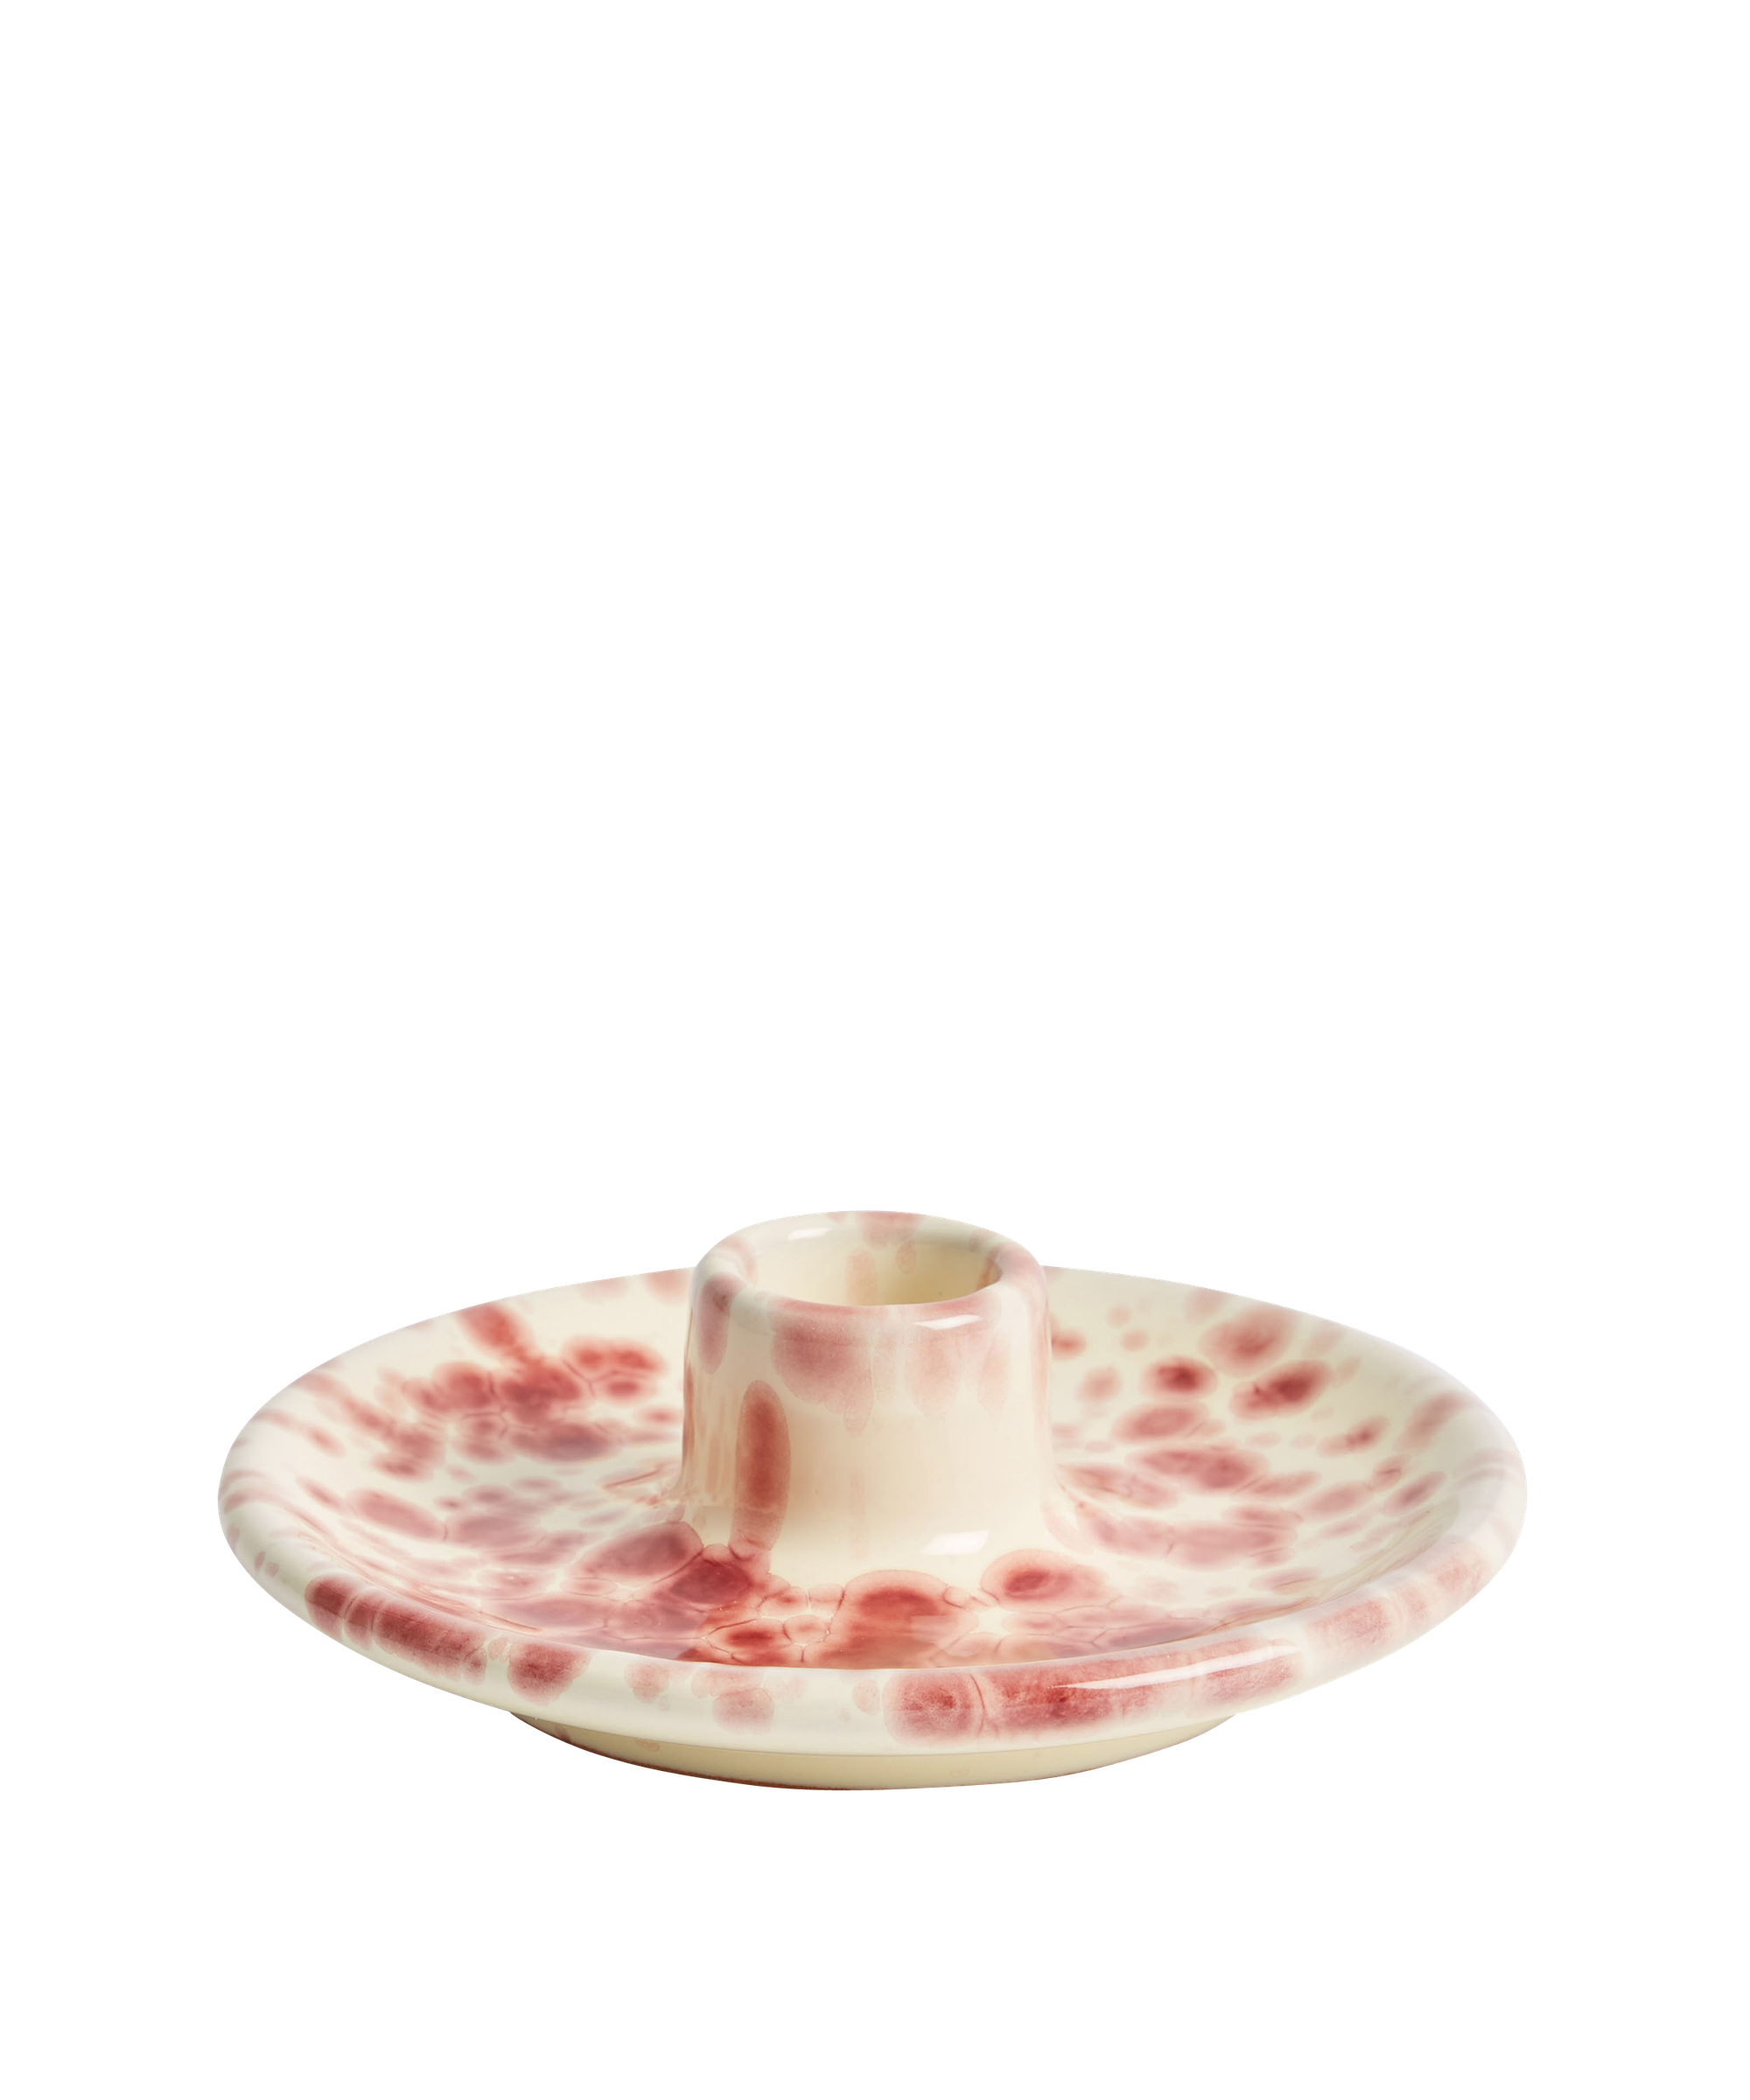 Hot Pottery Candle Holder in cranberry